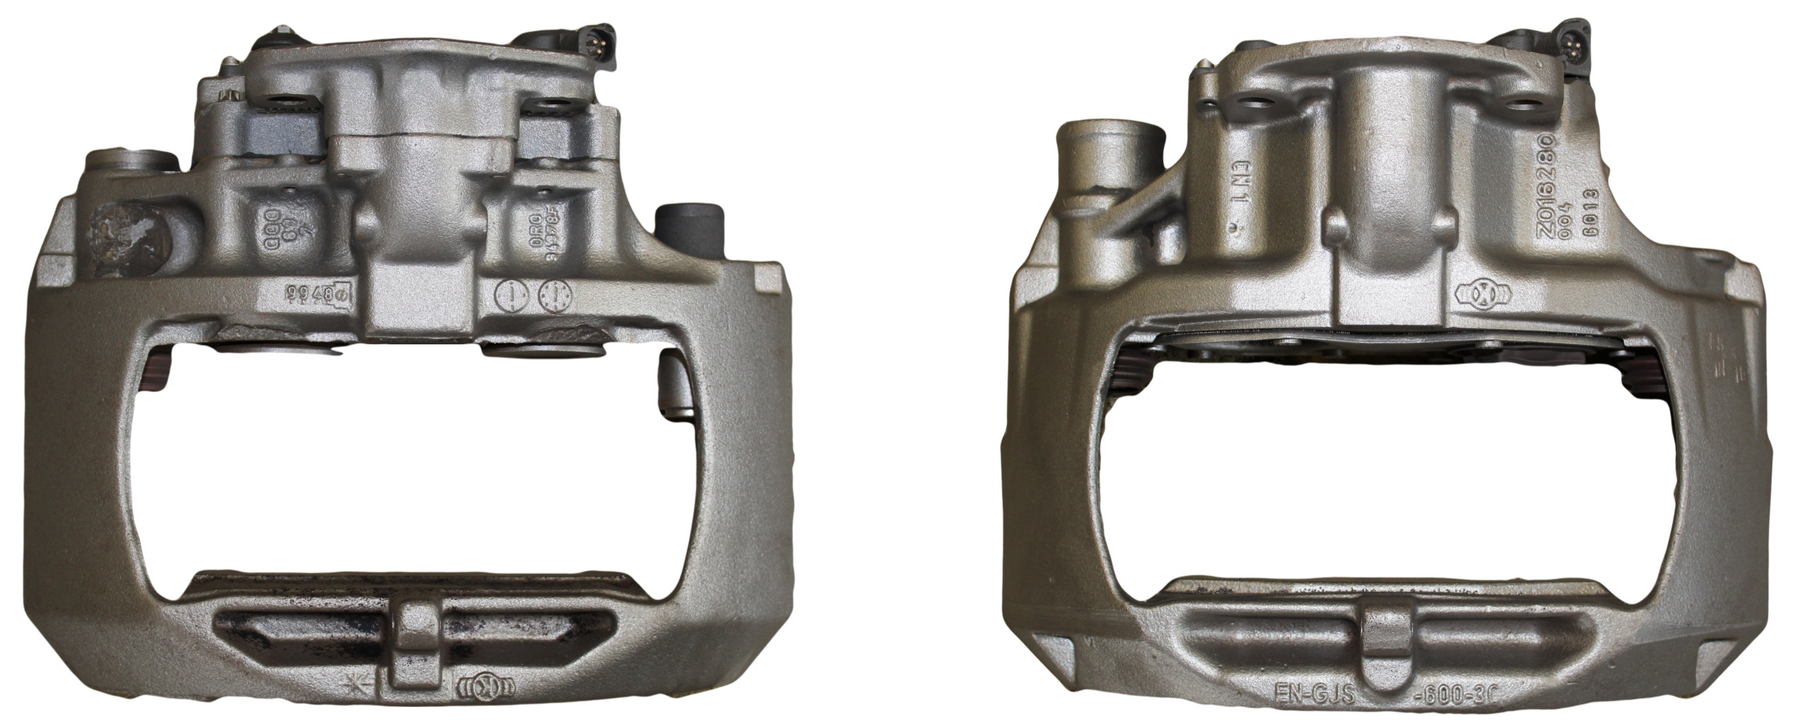 Knorr-Bremse SB7 and SN7 brake calipers - what is the difference?